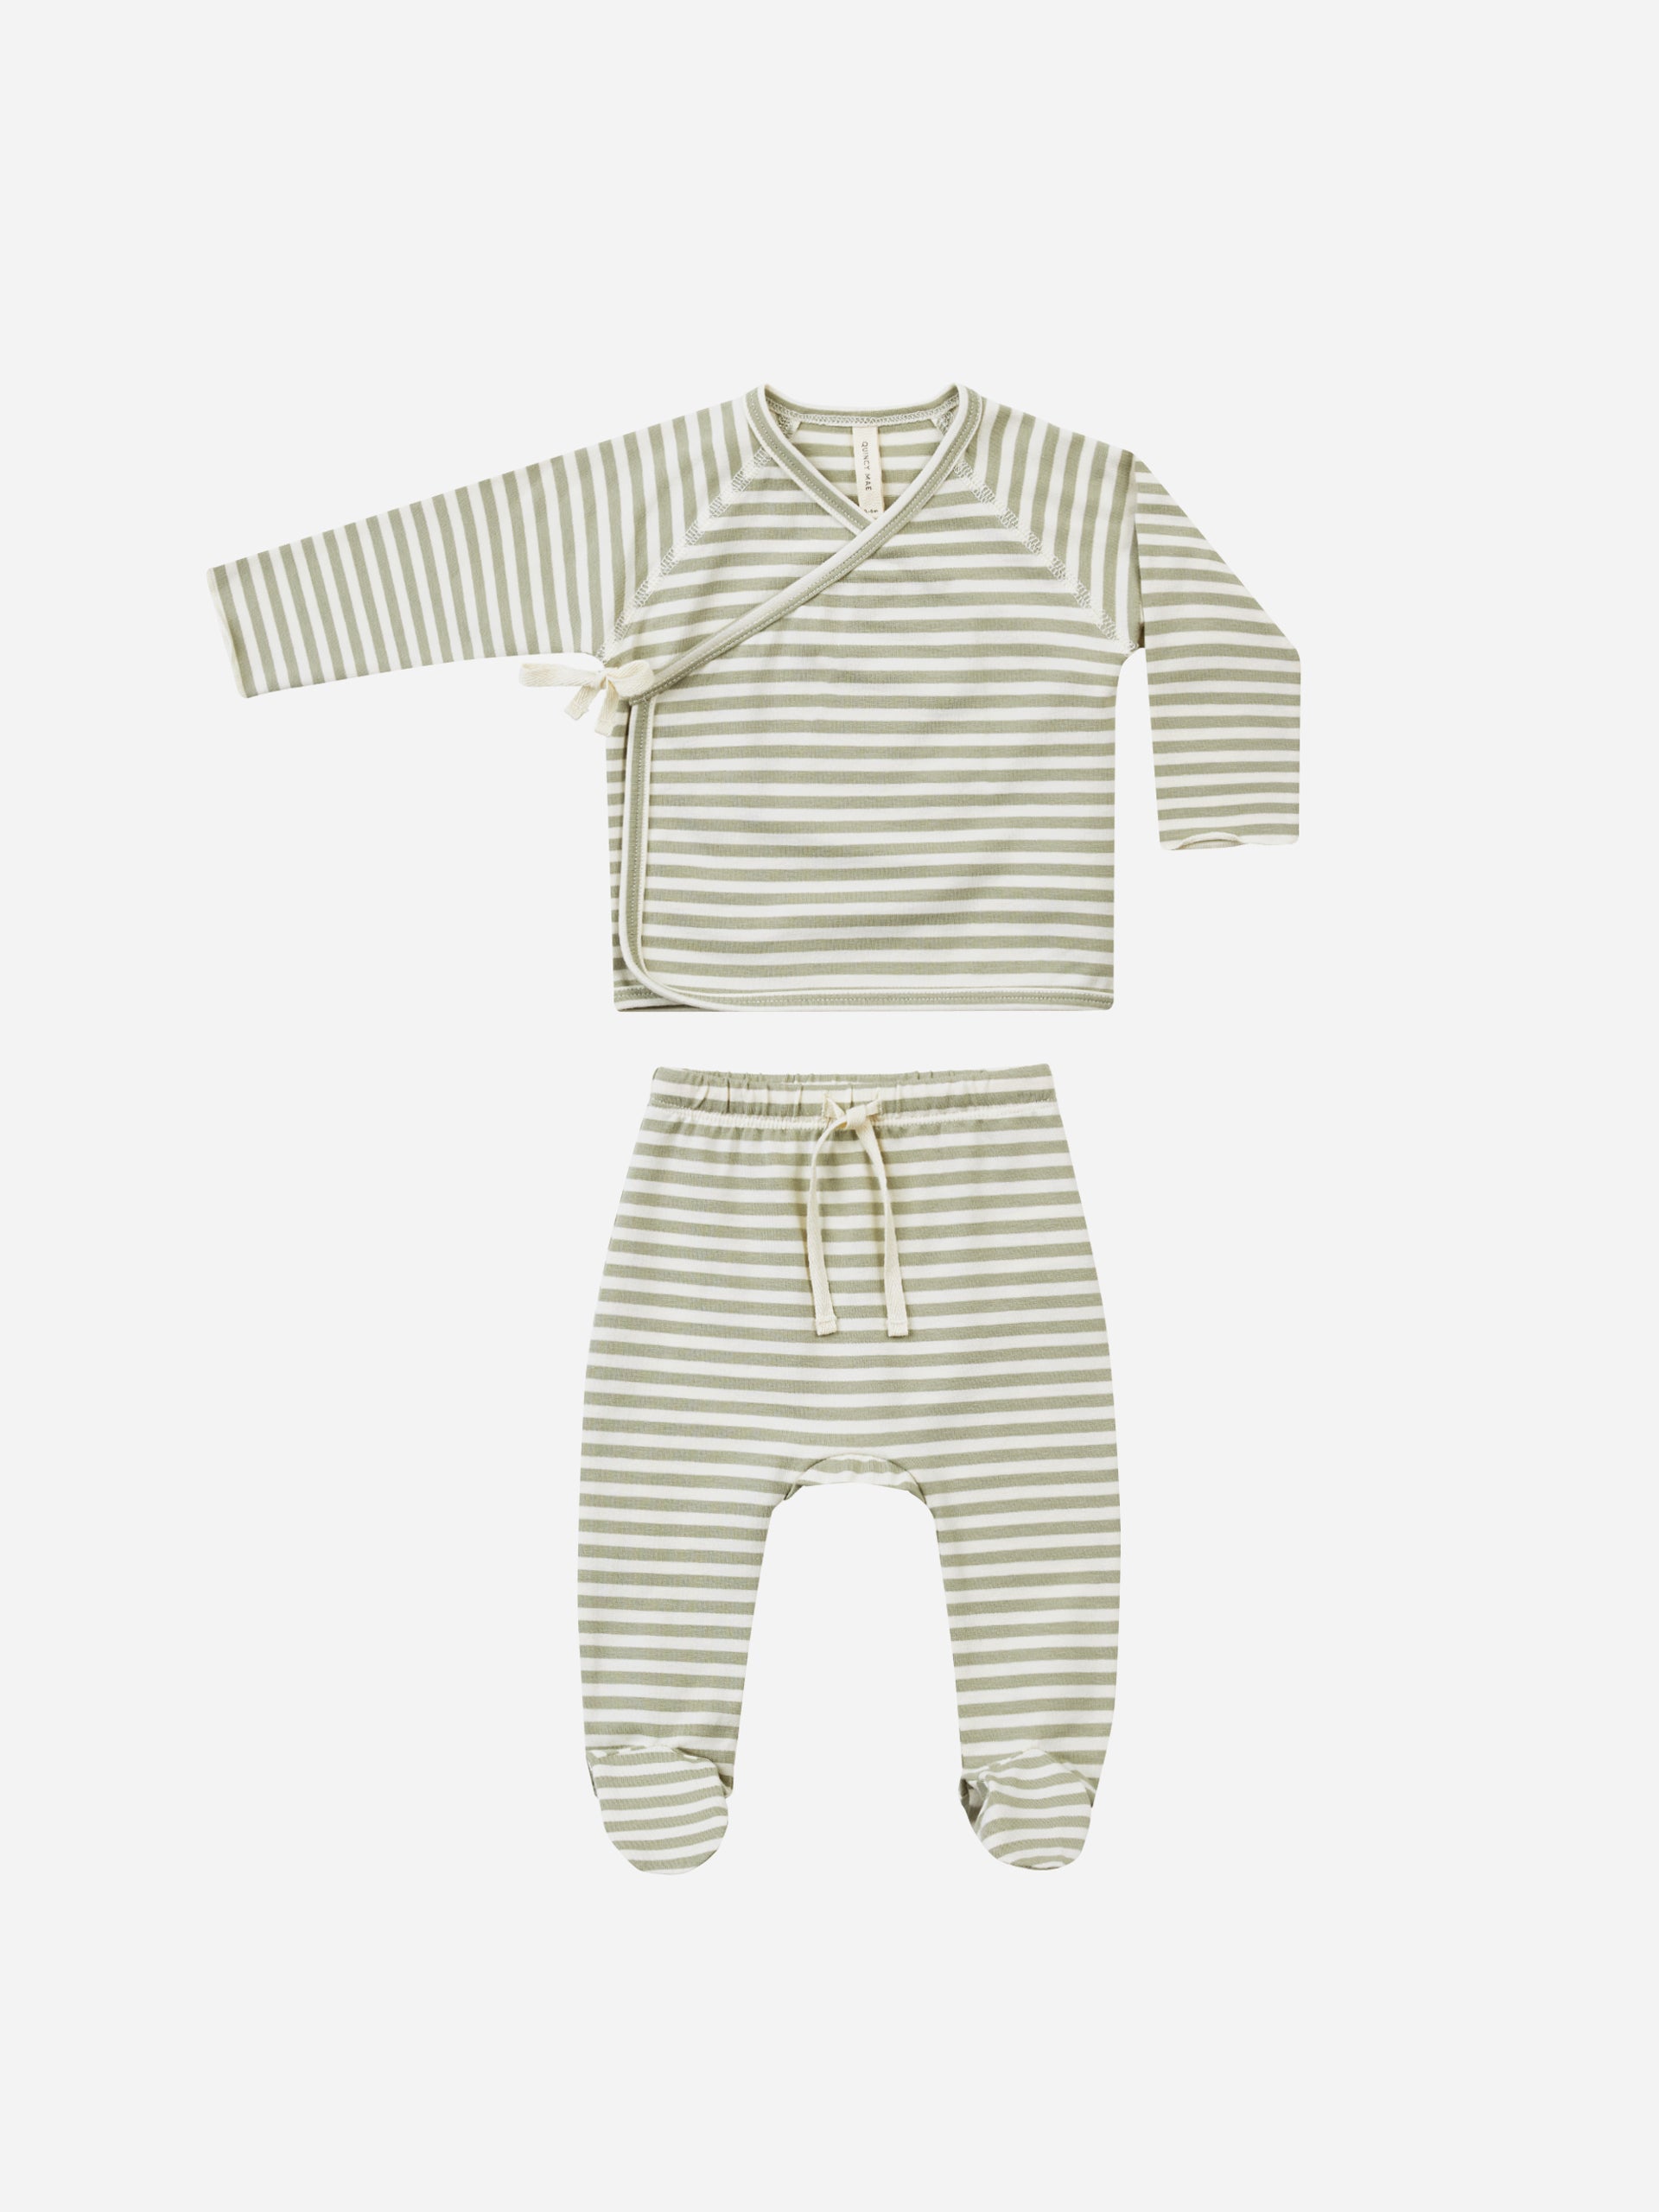 Wrap Top + Footed Pant Set || Sage Stripe - Rylee + Cru | Kids Clothes | Trendy Baby Clothes | Modern Infant Outfits |